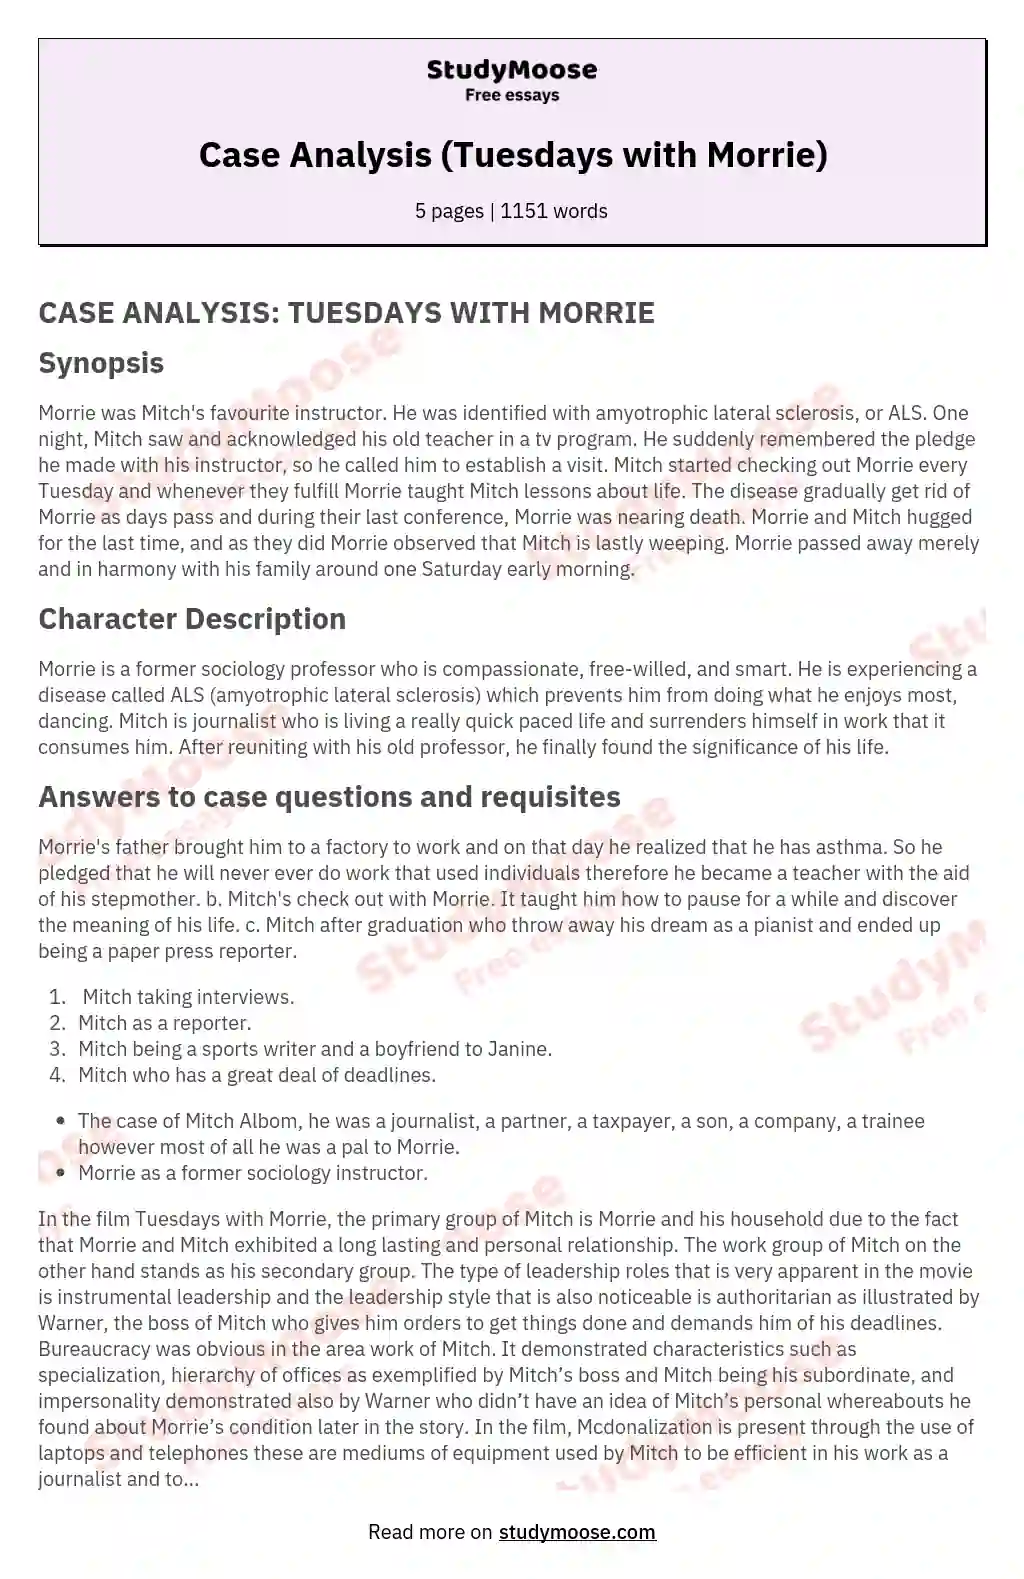 Case Analysis (Tuesdays with Morrie)